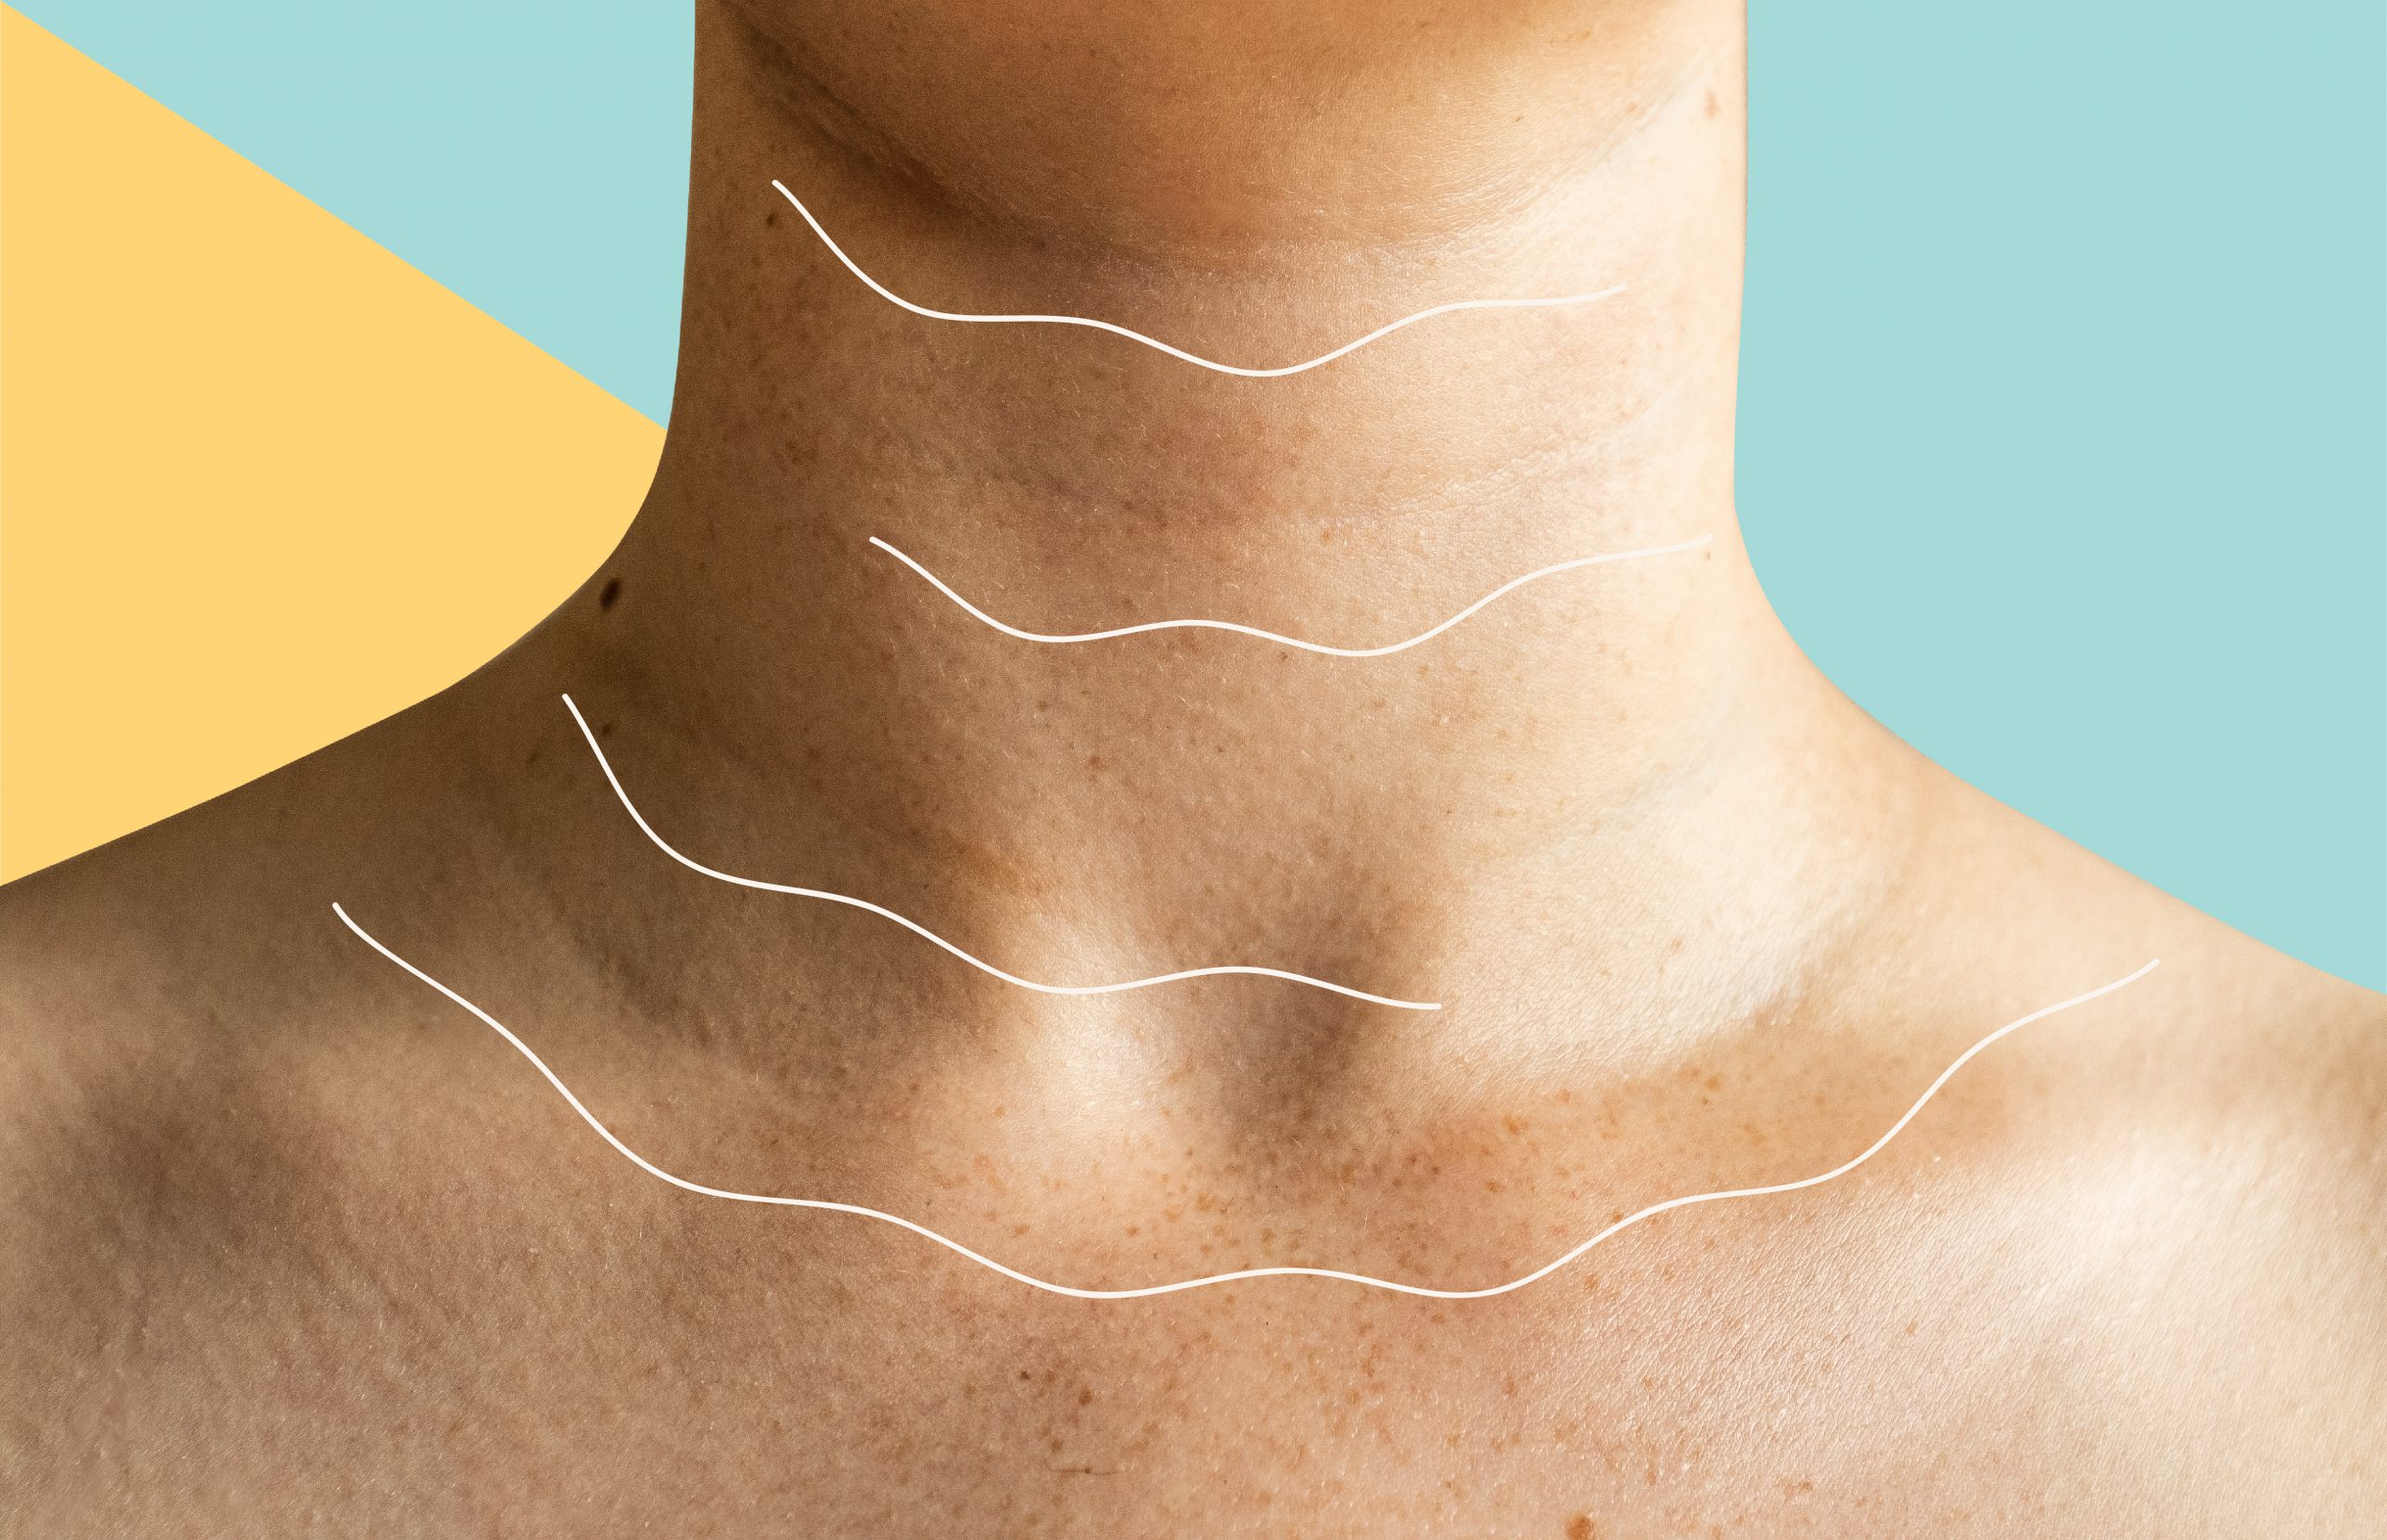 How To Prevent And Get Rid Of Tech Neck According To Skincare Experts